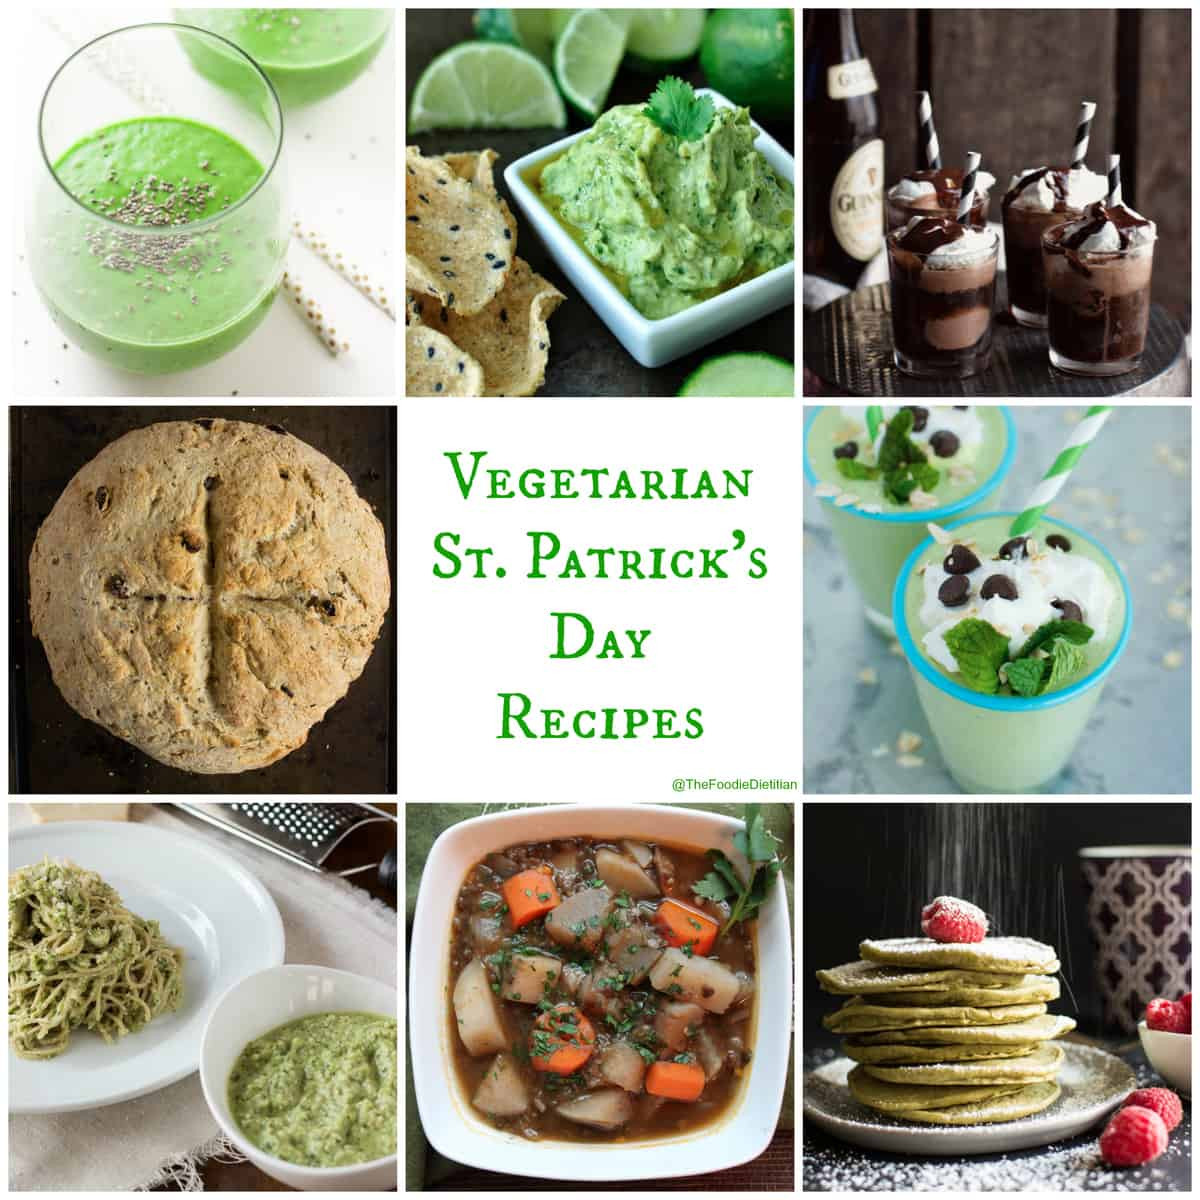 St Patrick's Day Food Recipes
 Ve arian St Patrick s Day Recipe Round Up The Foo